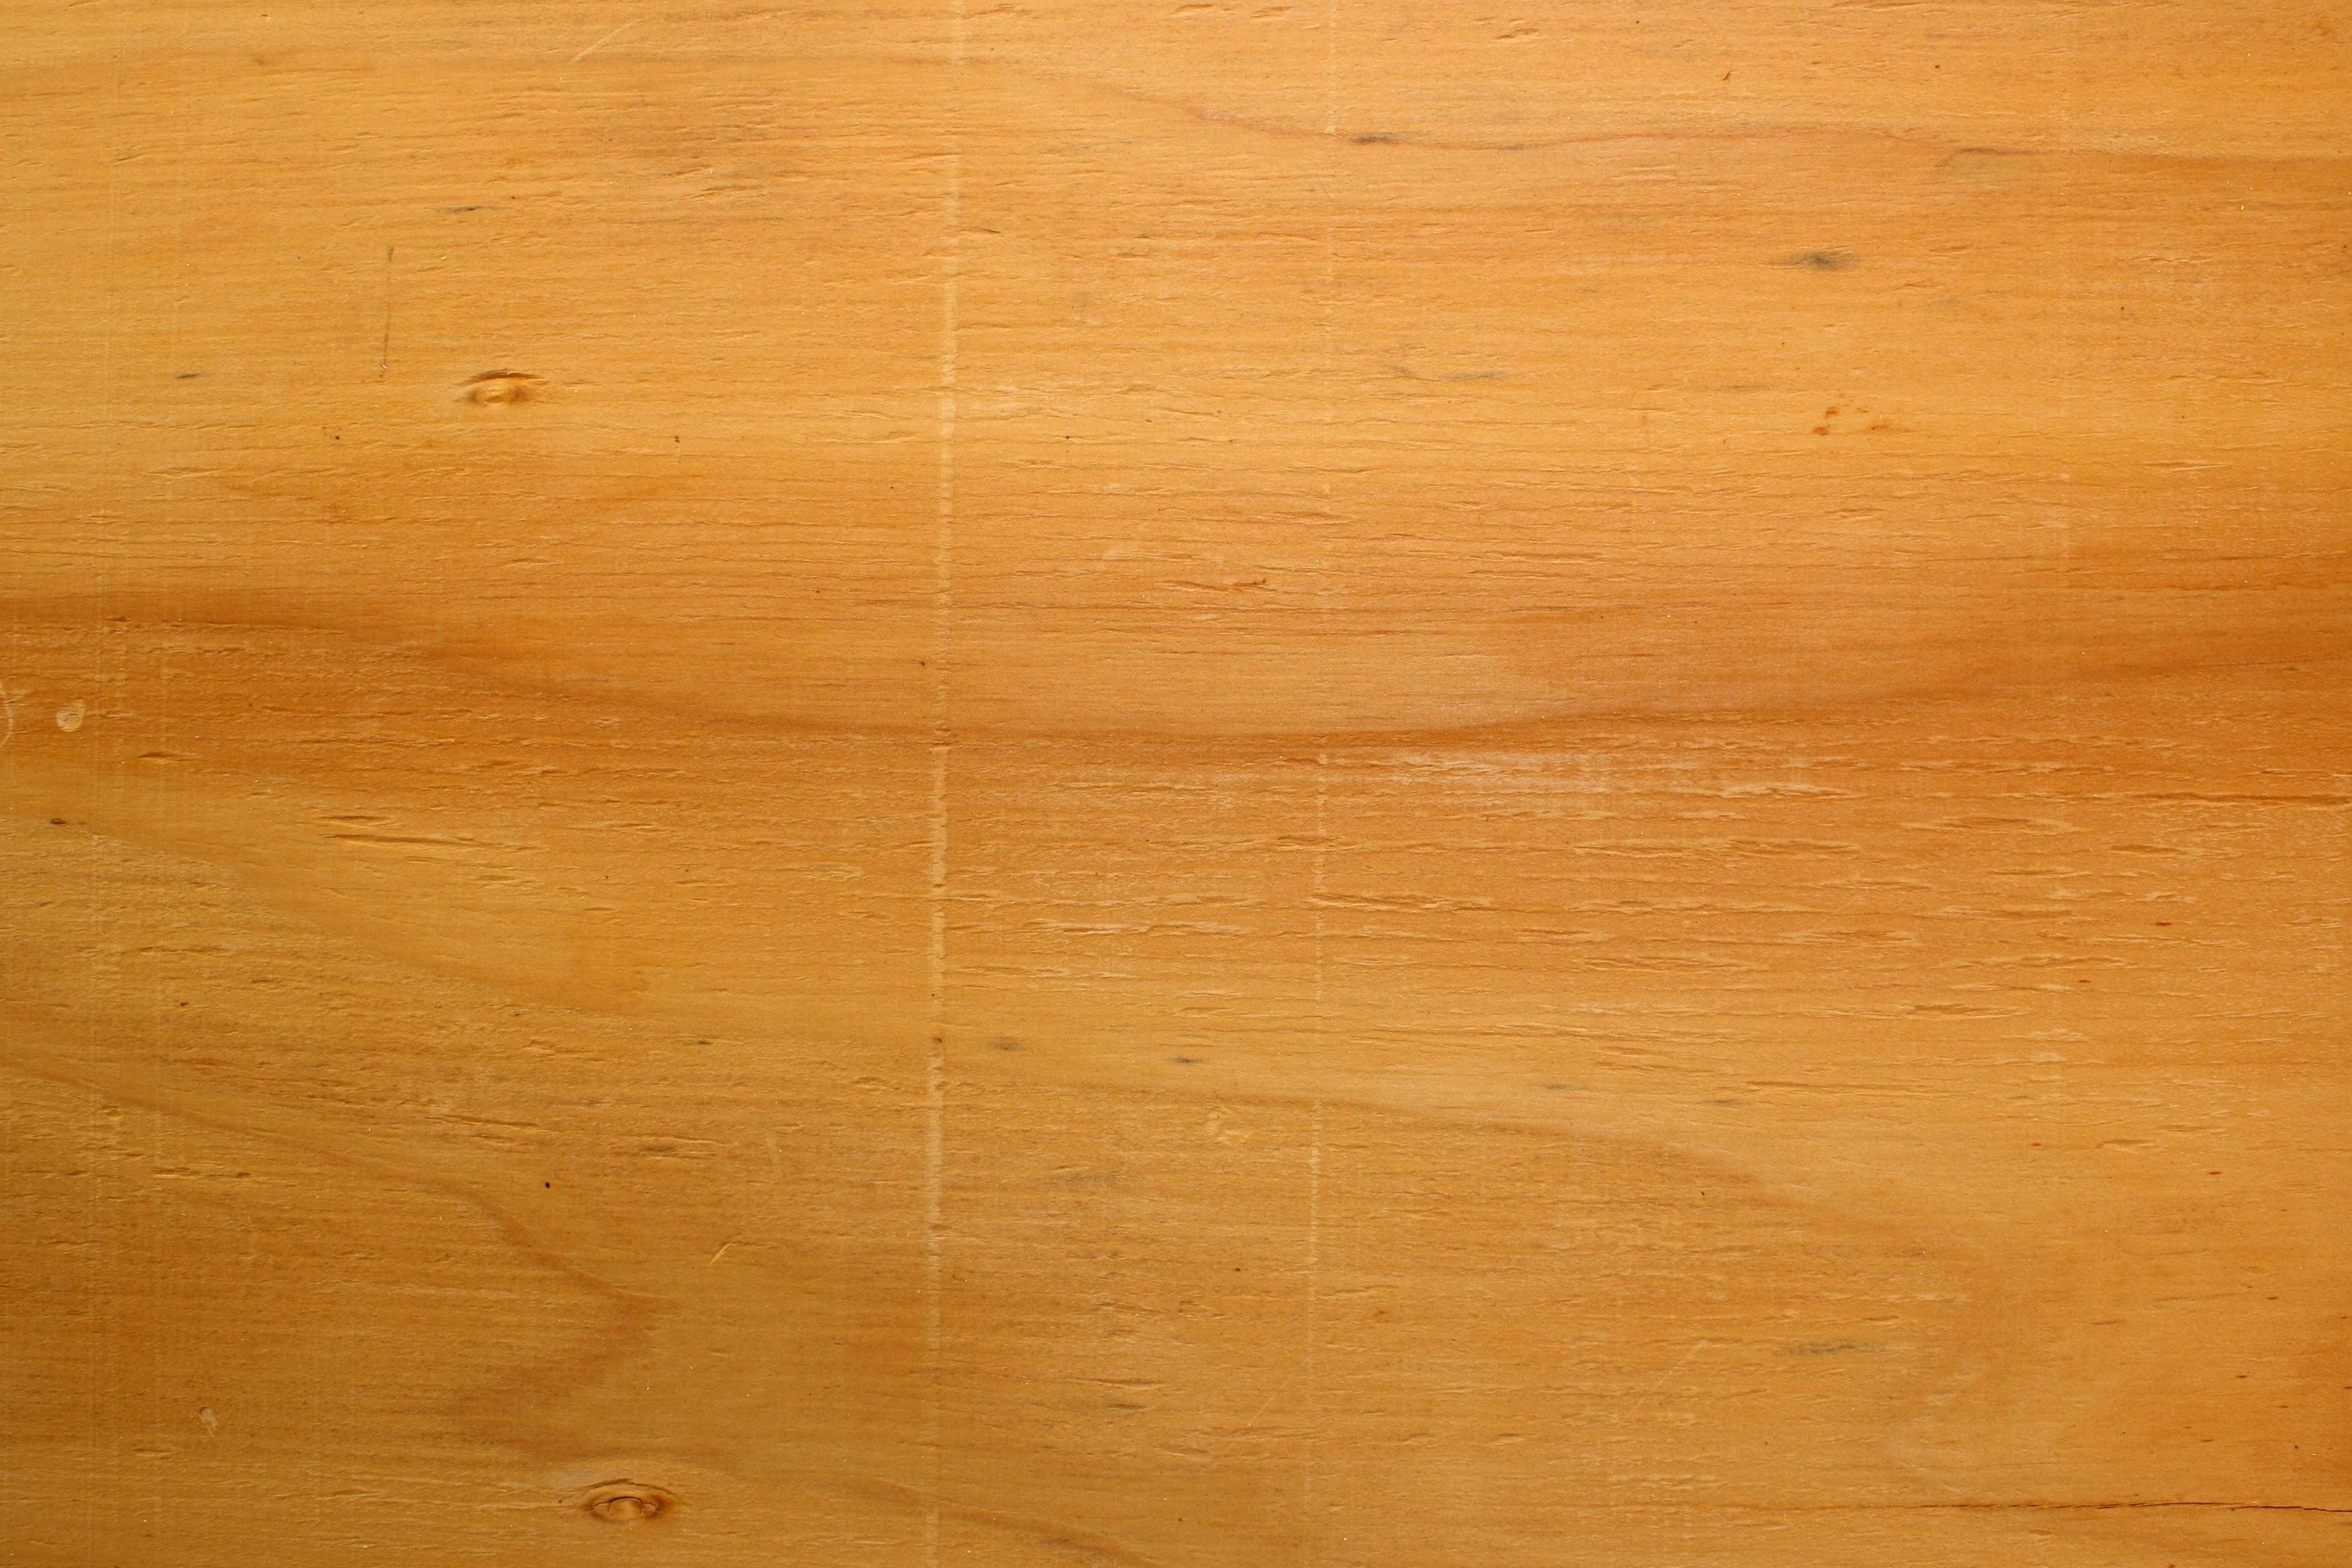 Plywood Close Up Texture with Horizontal Wood Grain Picture. Free